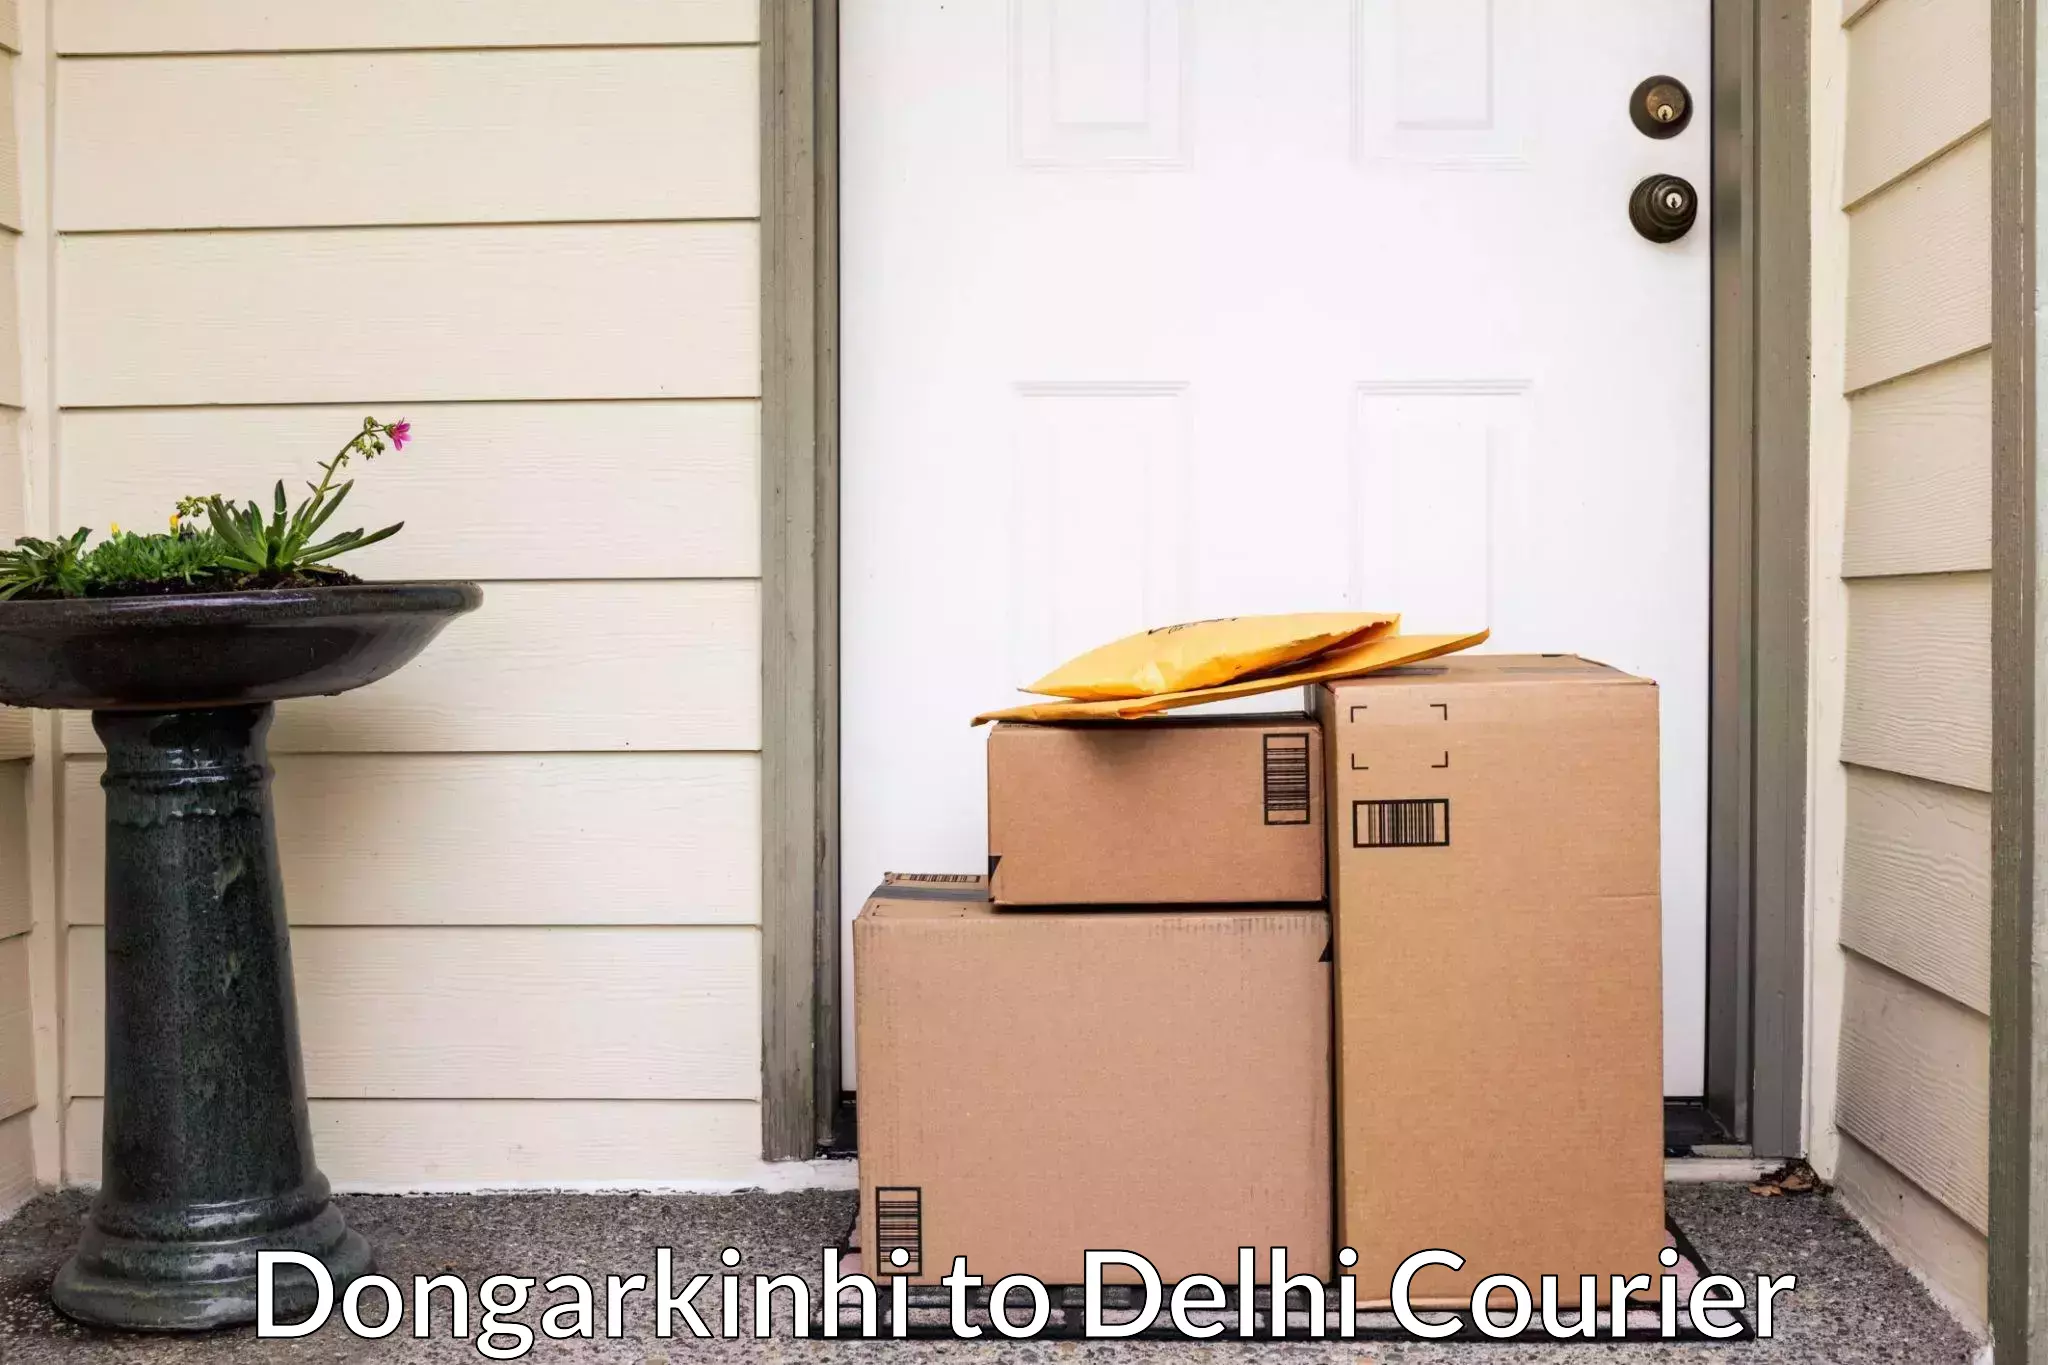 Full home moving services in Dongarkinhi to Kalkaji